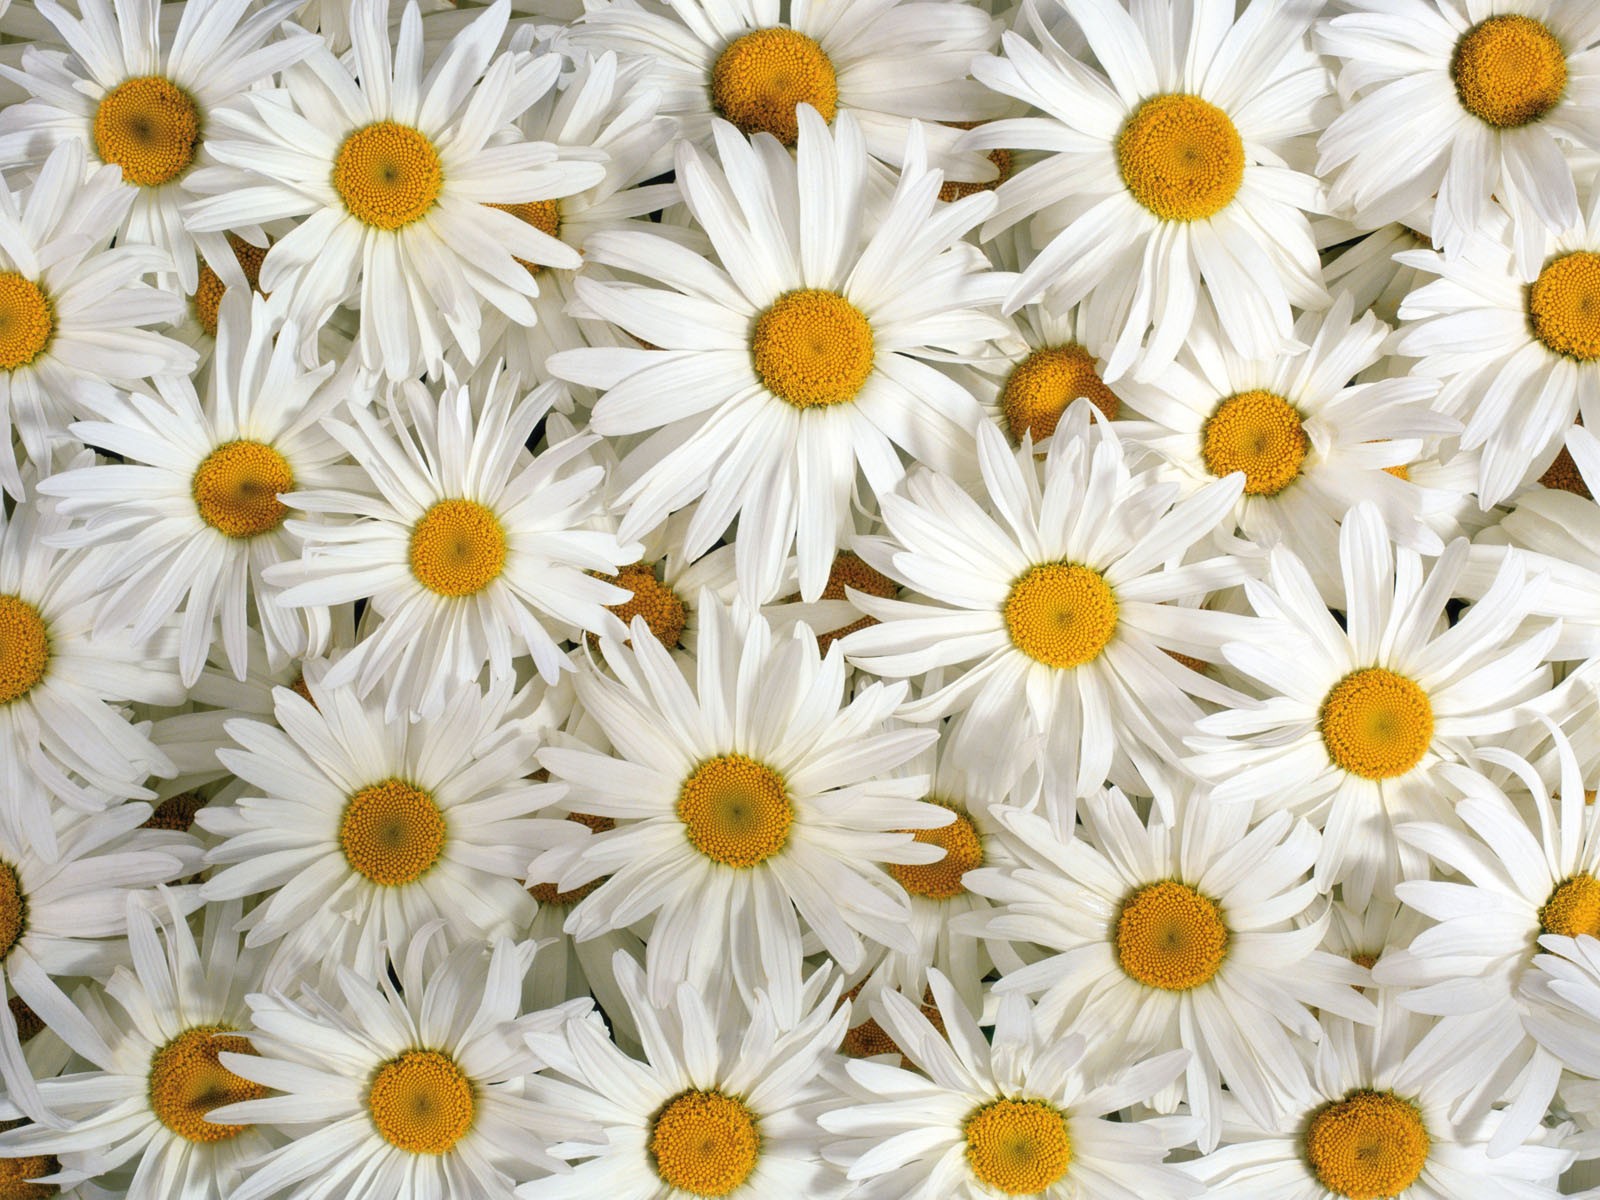 Daisy Flower Wallpaper Ahd Images Xpx 1600x1200px